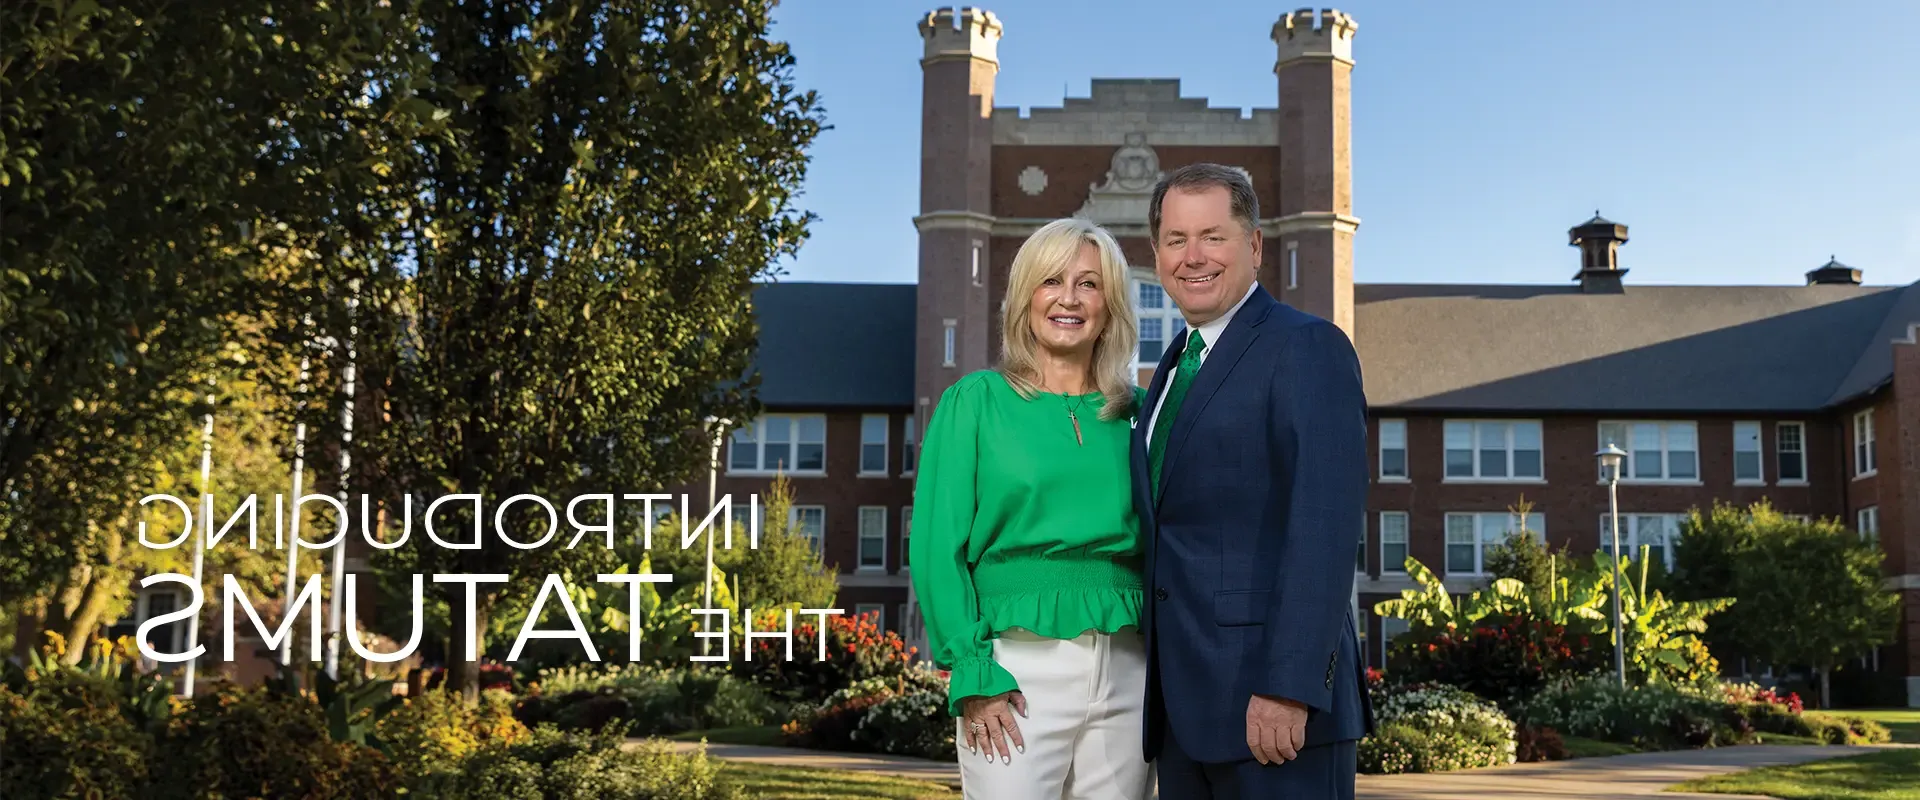 Introducing the Tatums – Northwest’s new president and first lady are focused on investing in the future of the University